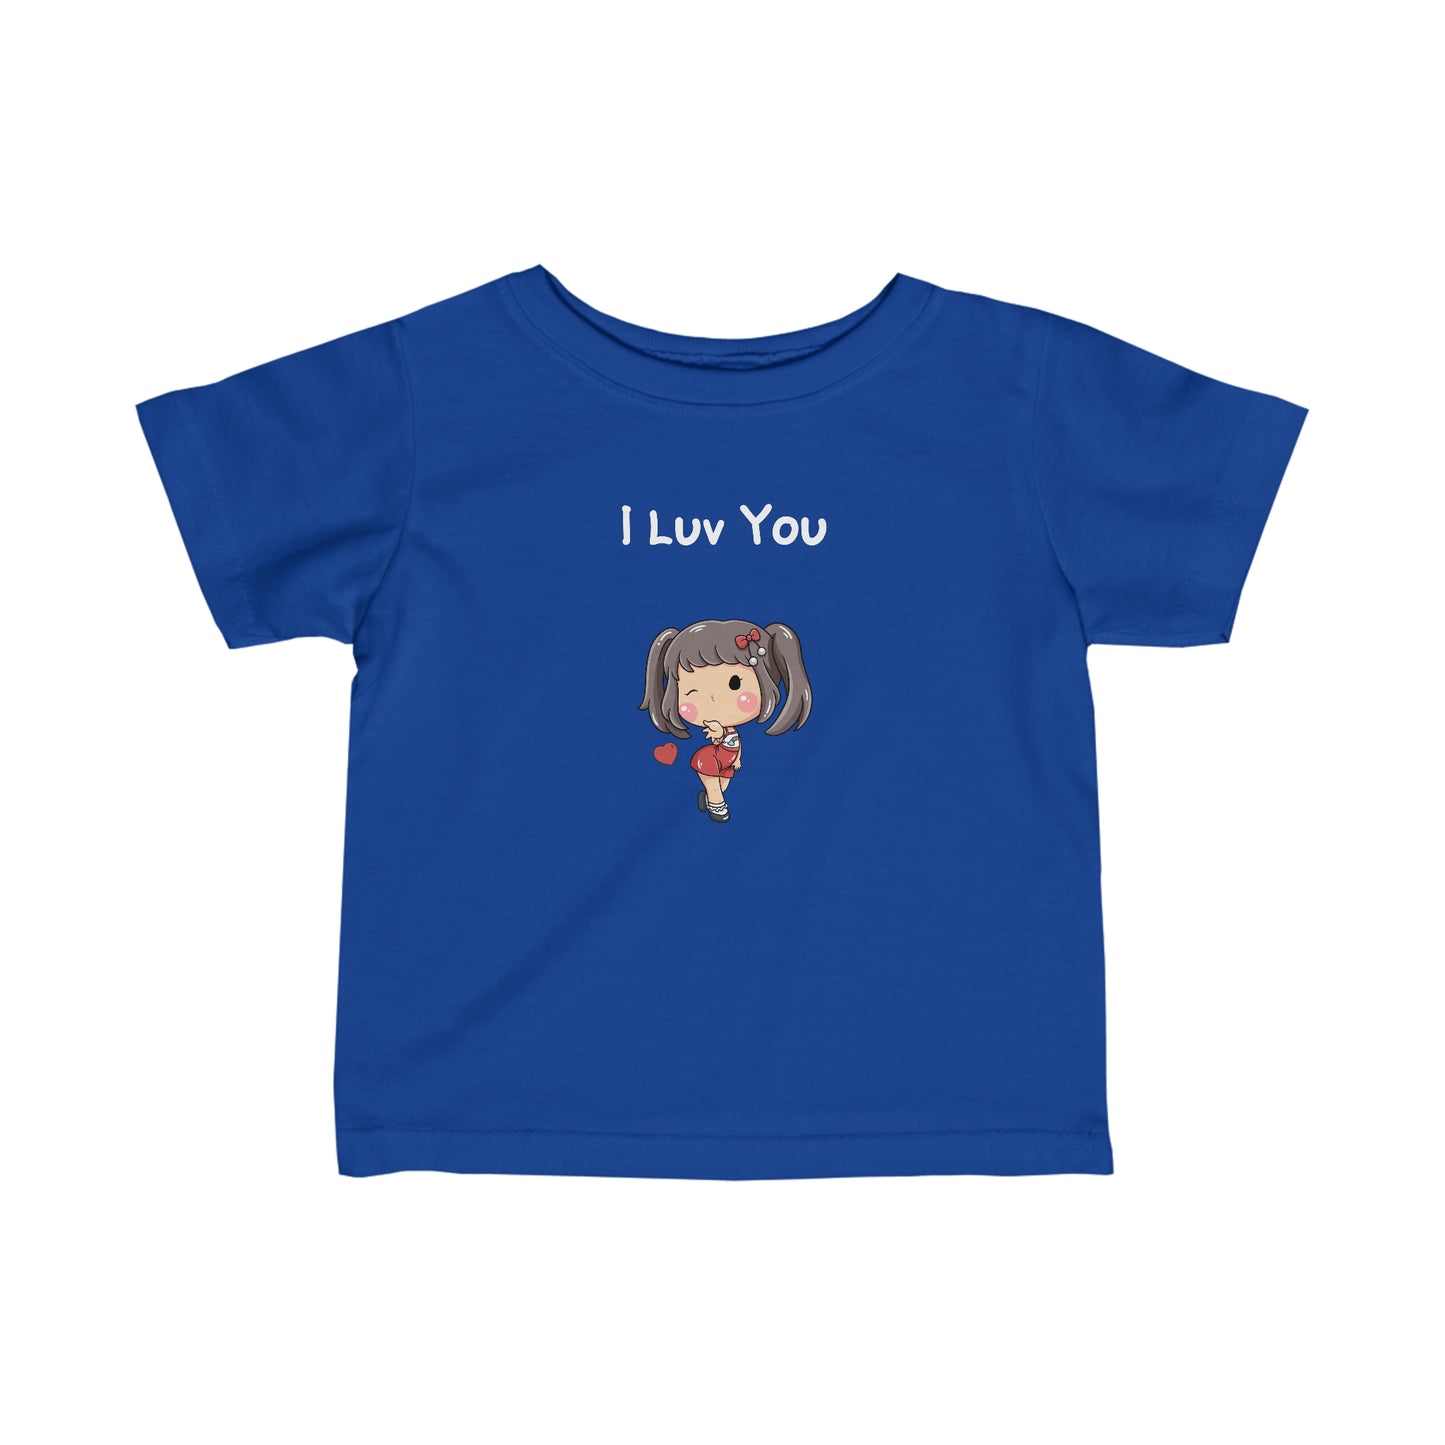 I Luv You.  Infant Fine Jersey Tee